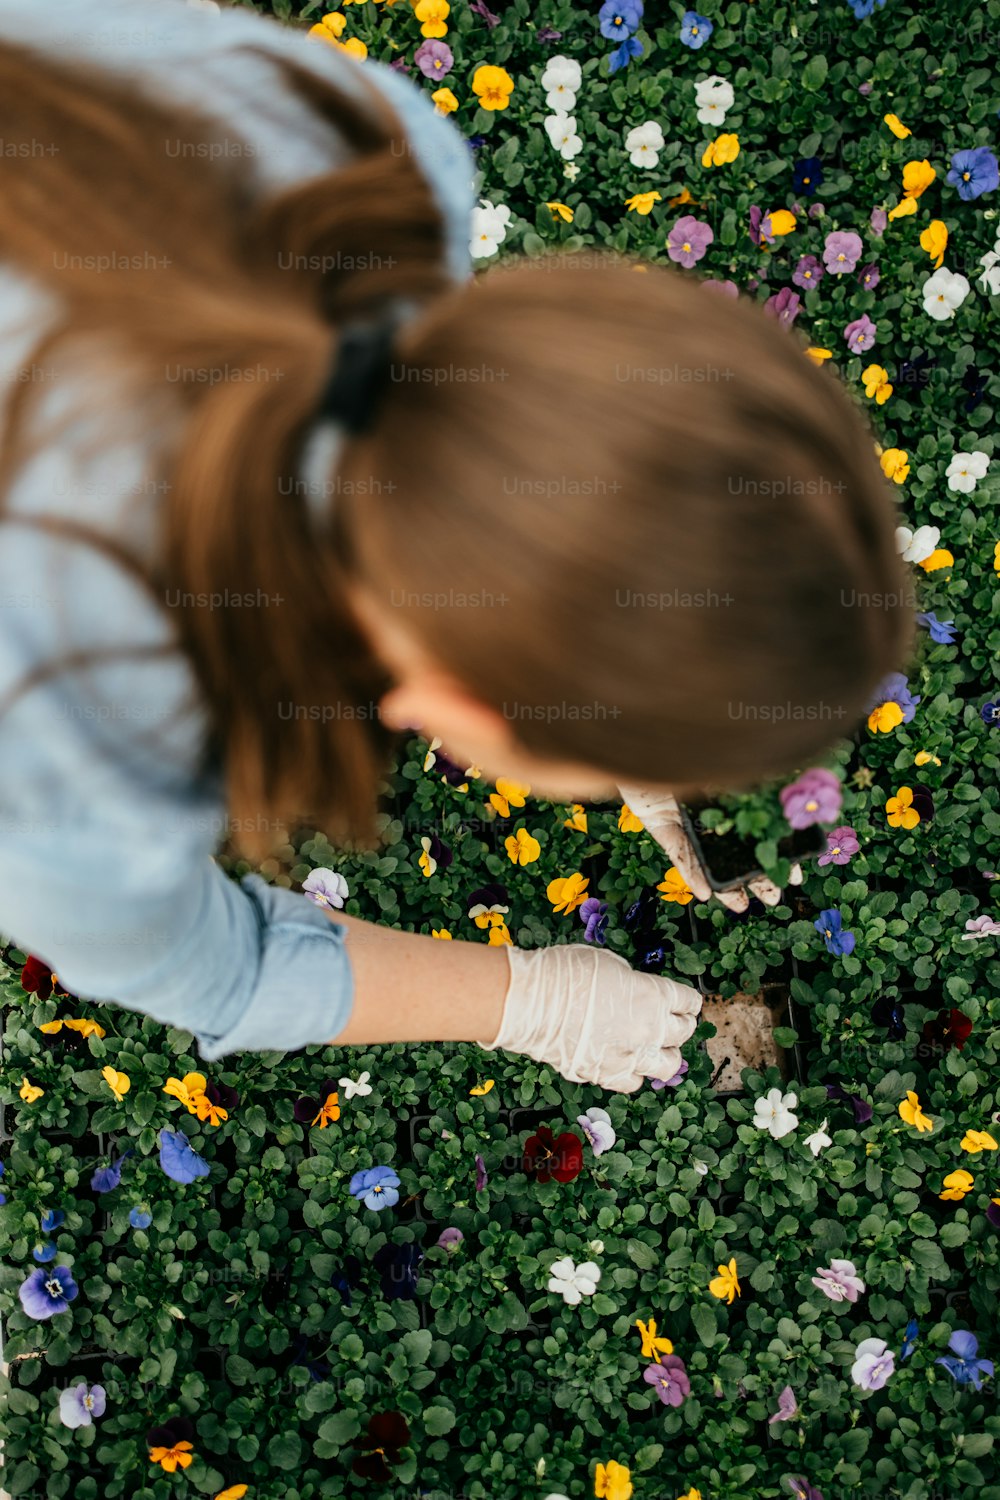 Happy and positive young adult woman working in greenhouse and enjoying in beautiful flowers.